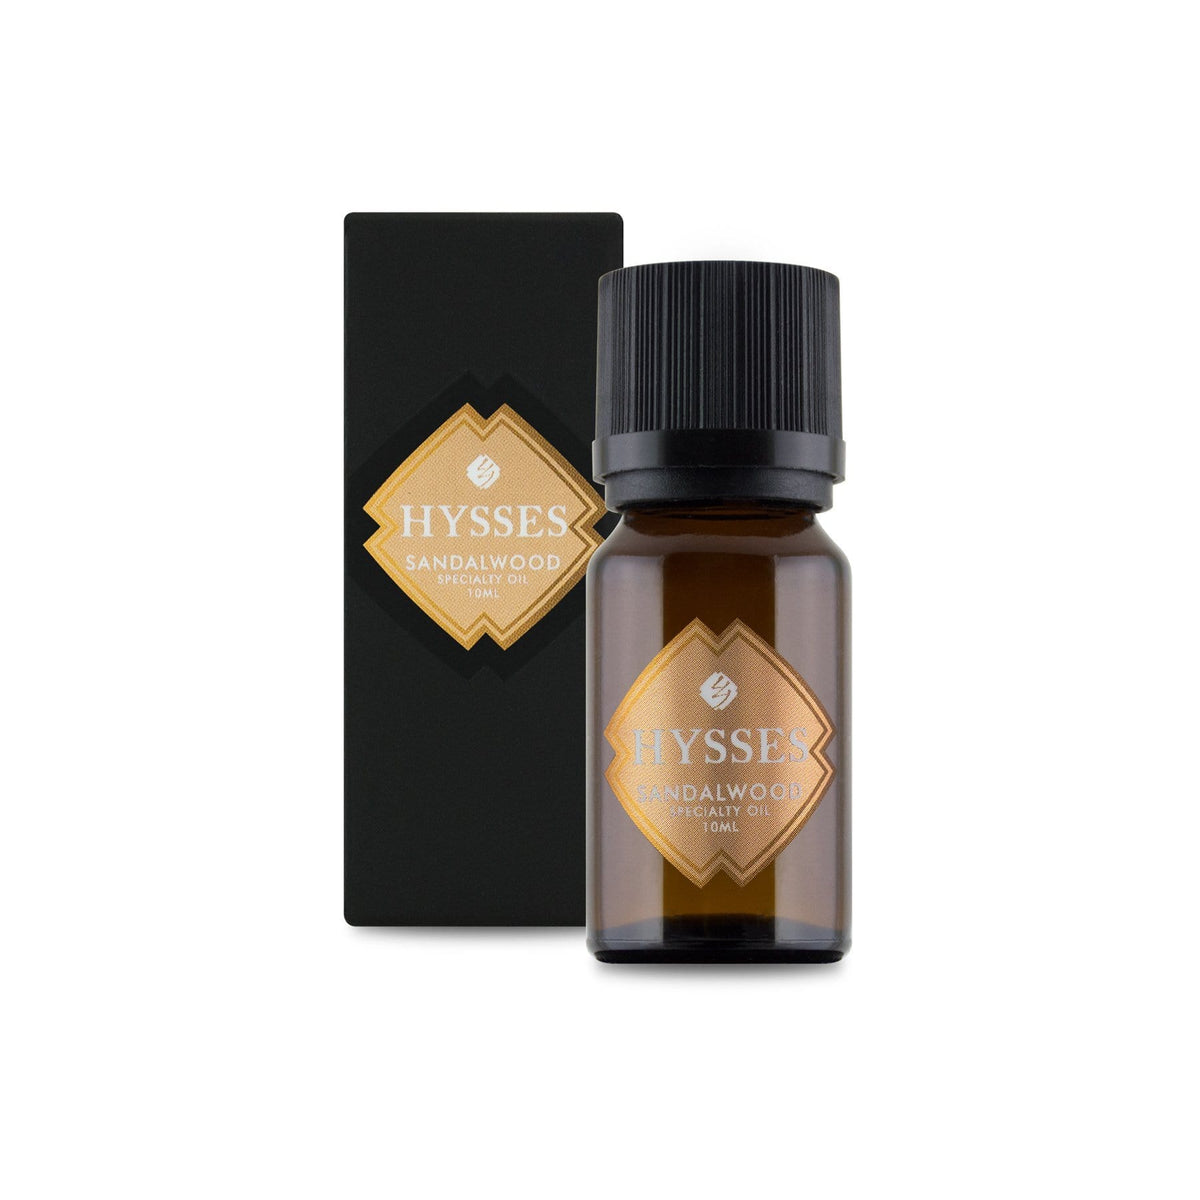 Hysses Essential Oil 10ml Specialty Oil Sandalwood Absolute